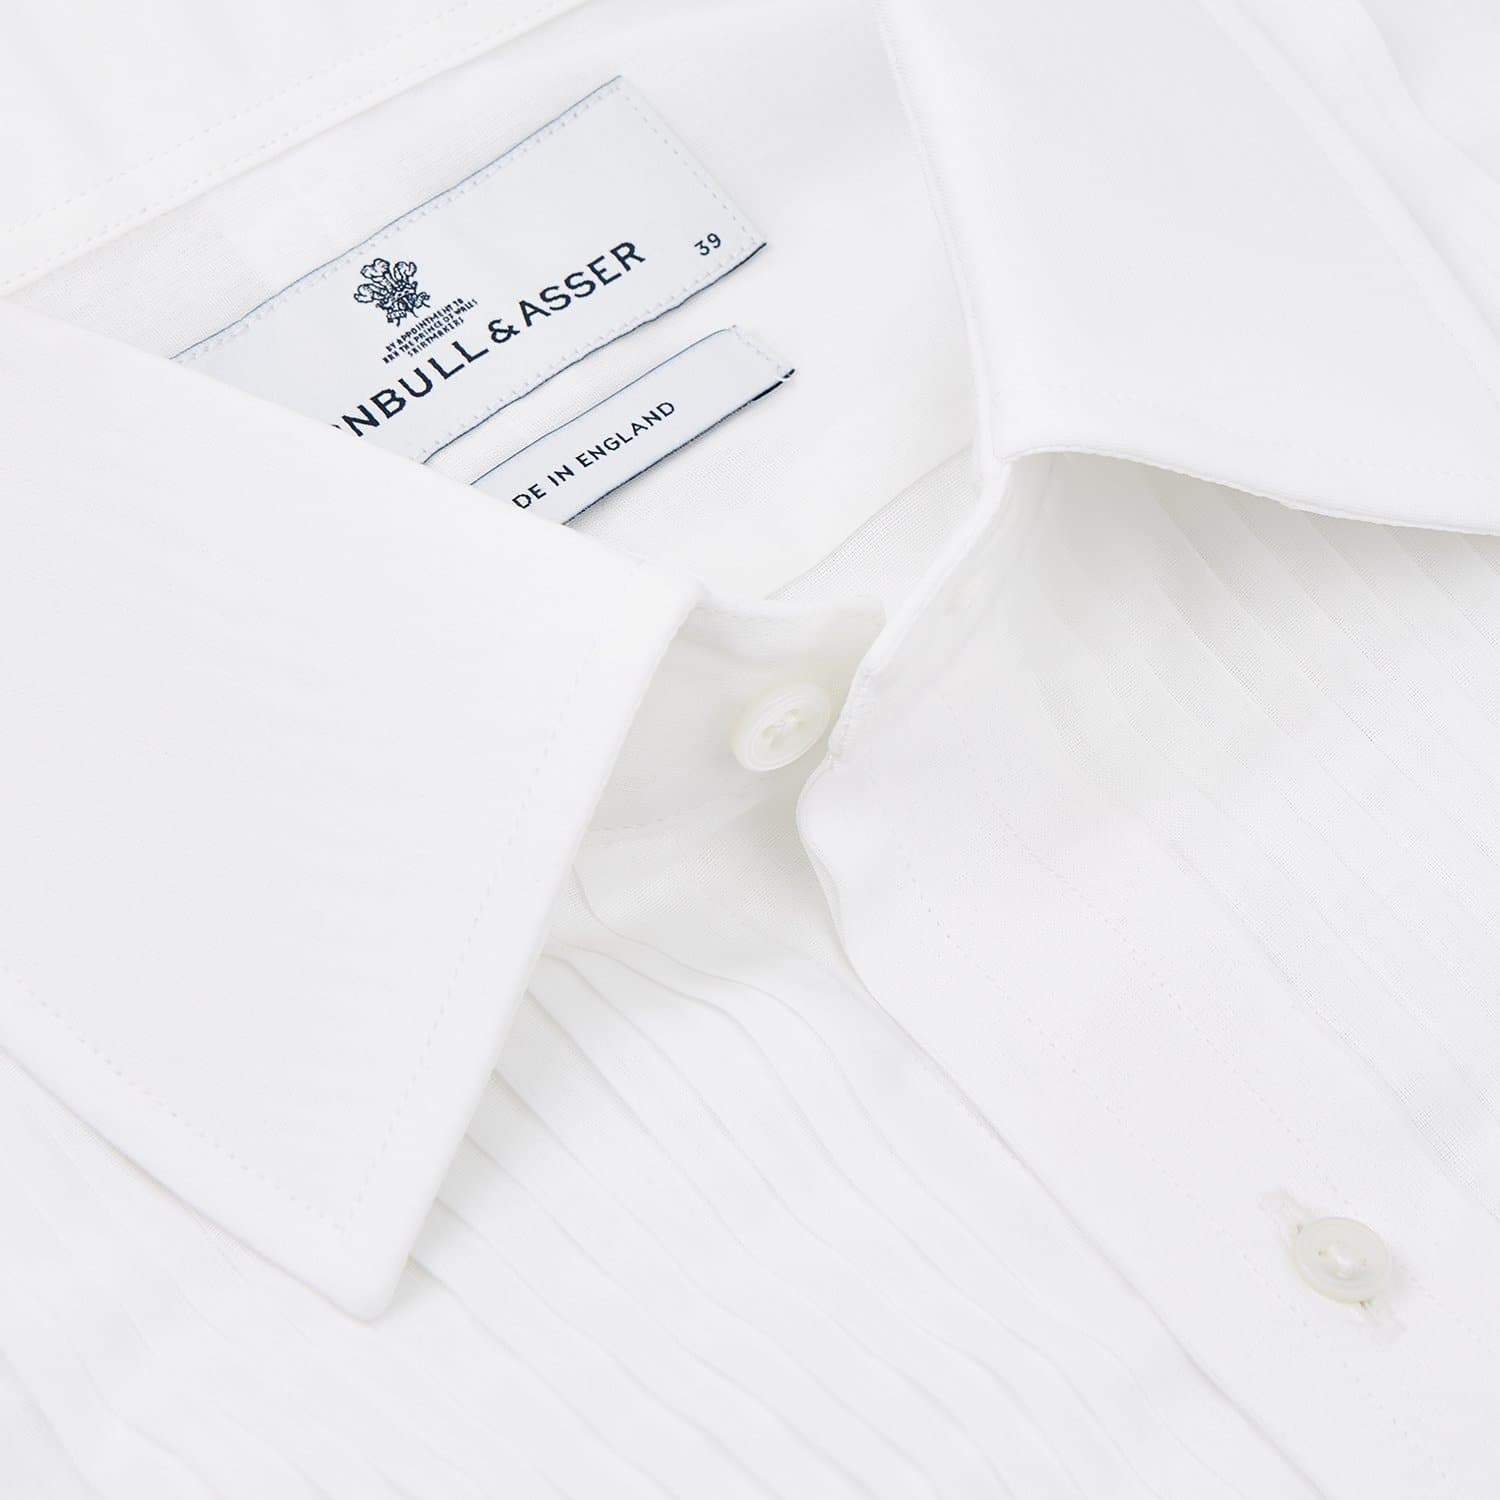 White Voile Dress Shirt - Die Another Day Edition - By Turnbull & Asser CLOTHING Turnbull & Asser 